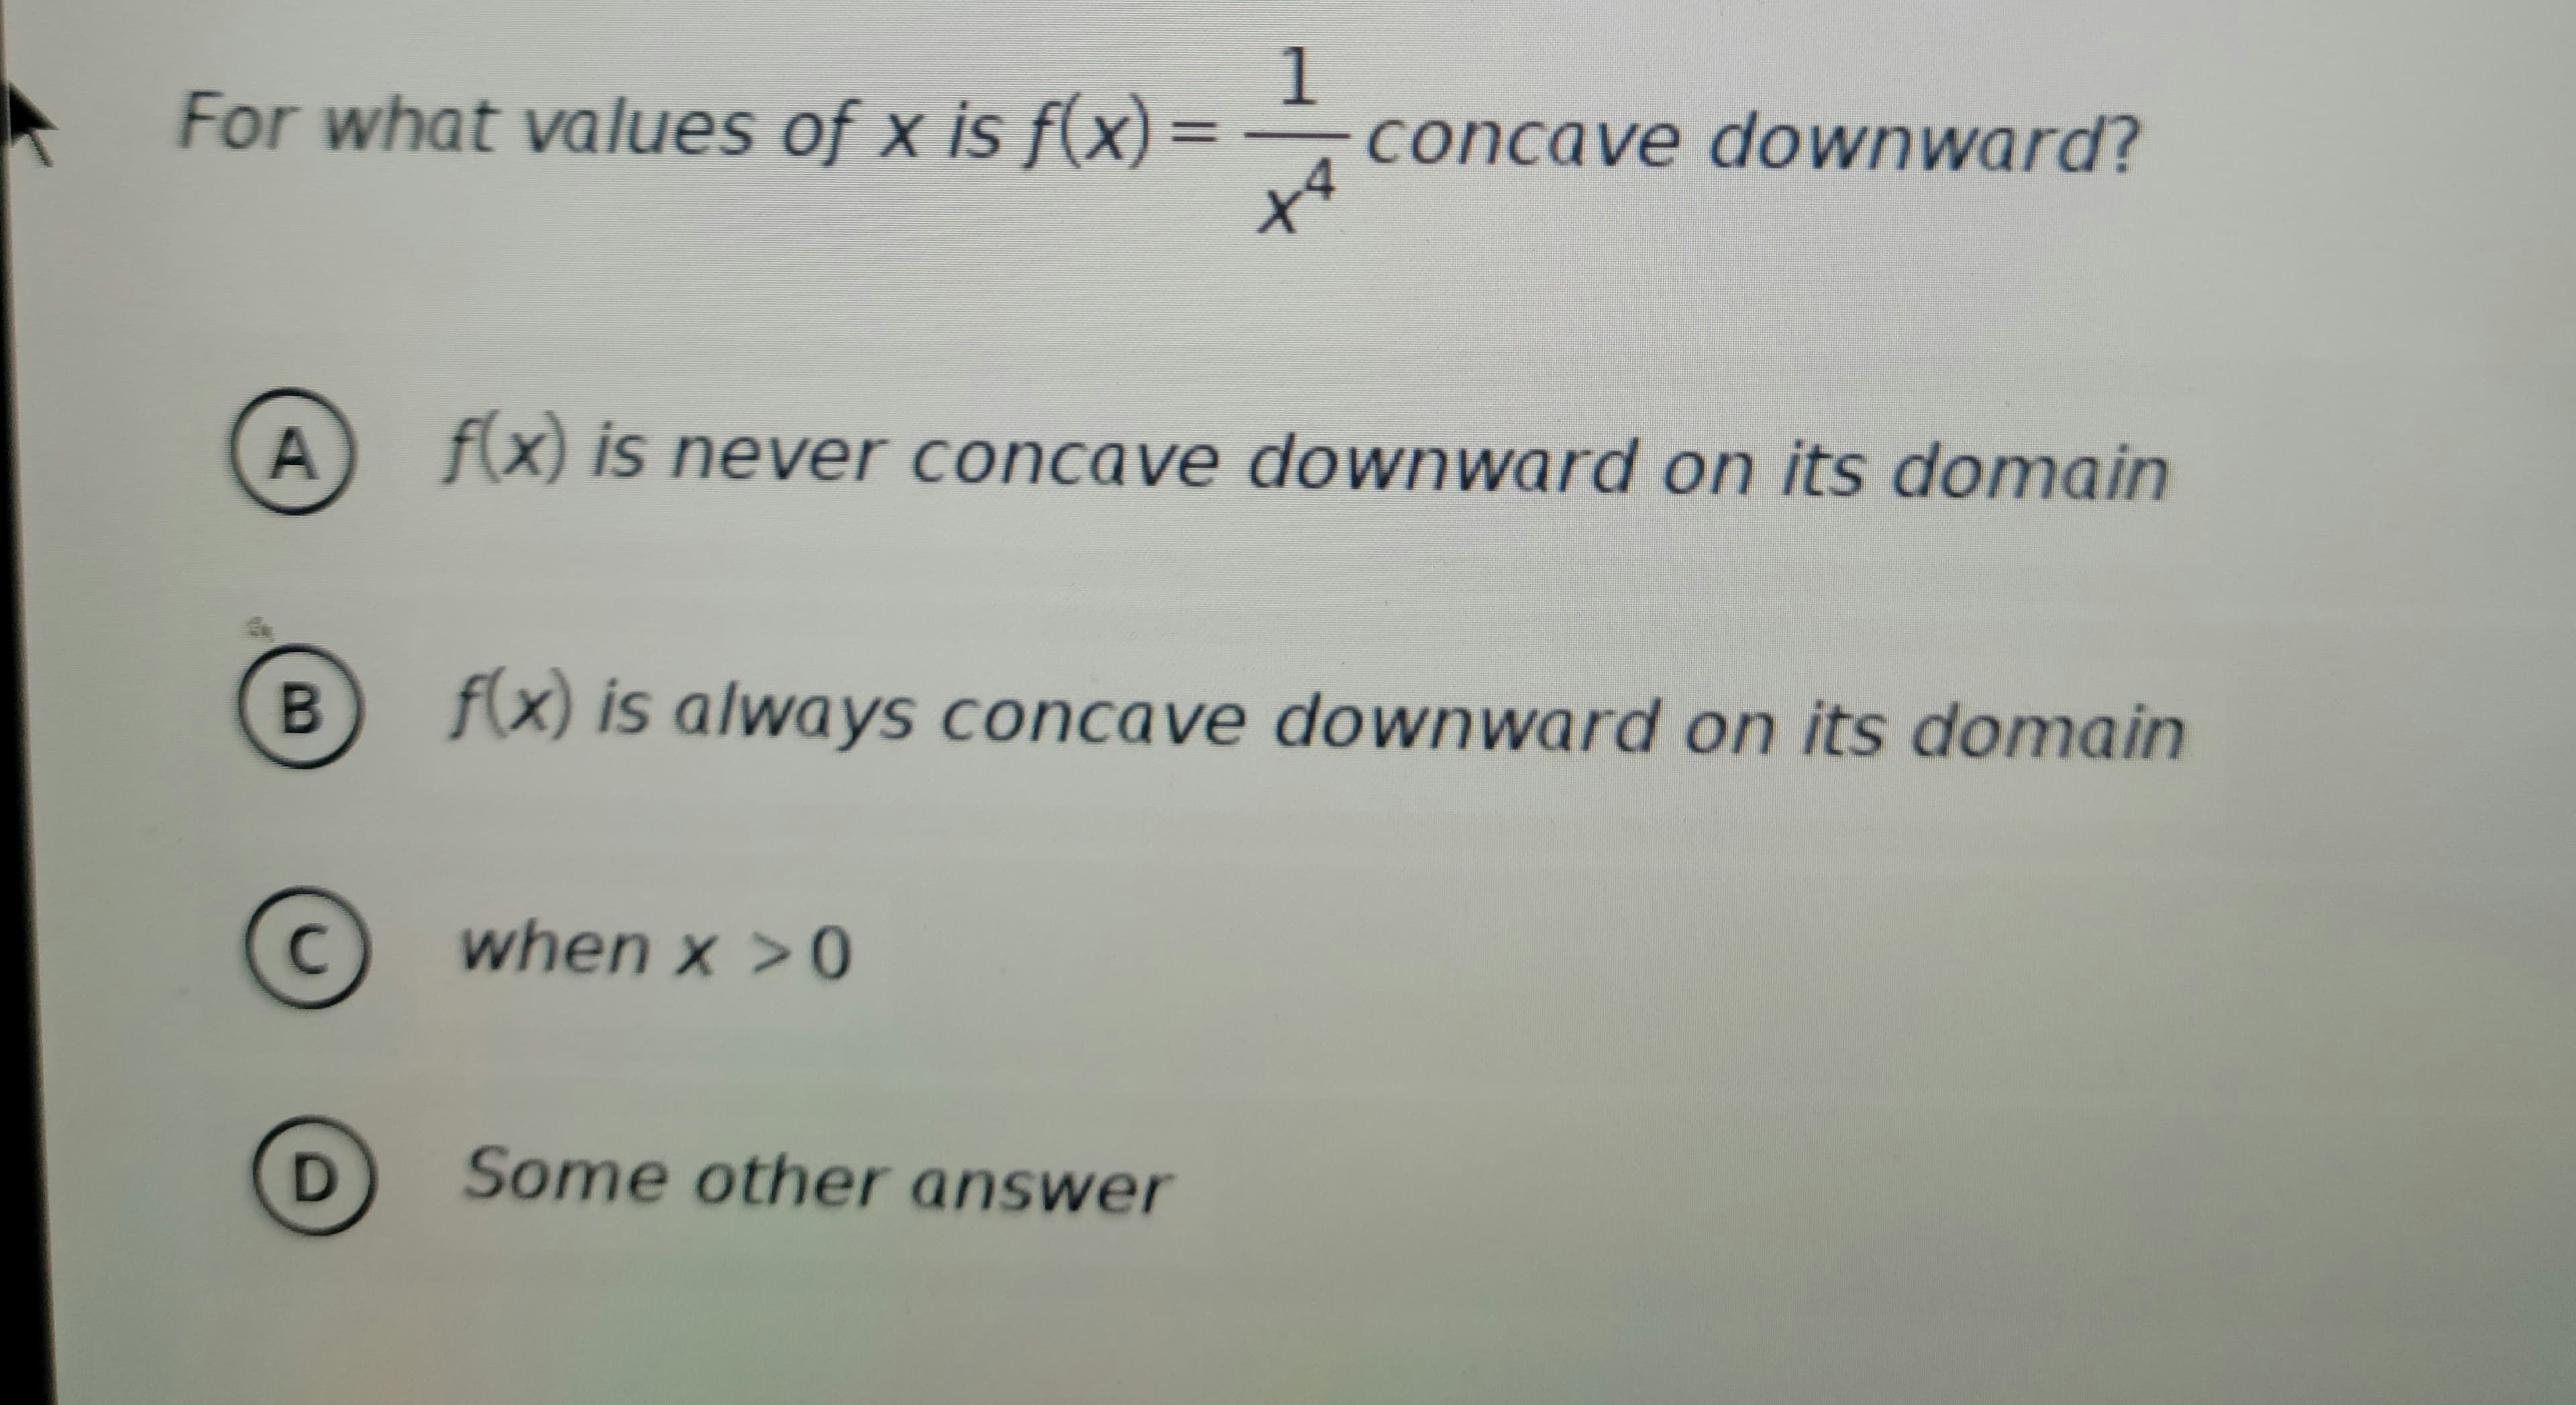 1
For what values of x is f(x) = concave downward?
A
B
C
D
f(x) is never concave downward on its domain
*+
f(x) is always concave downward on its domain
when x > 0
Some other answer